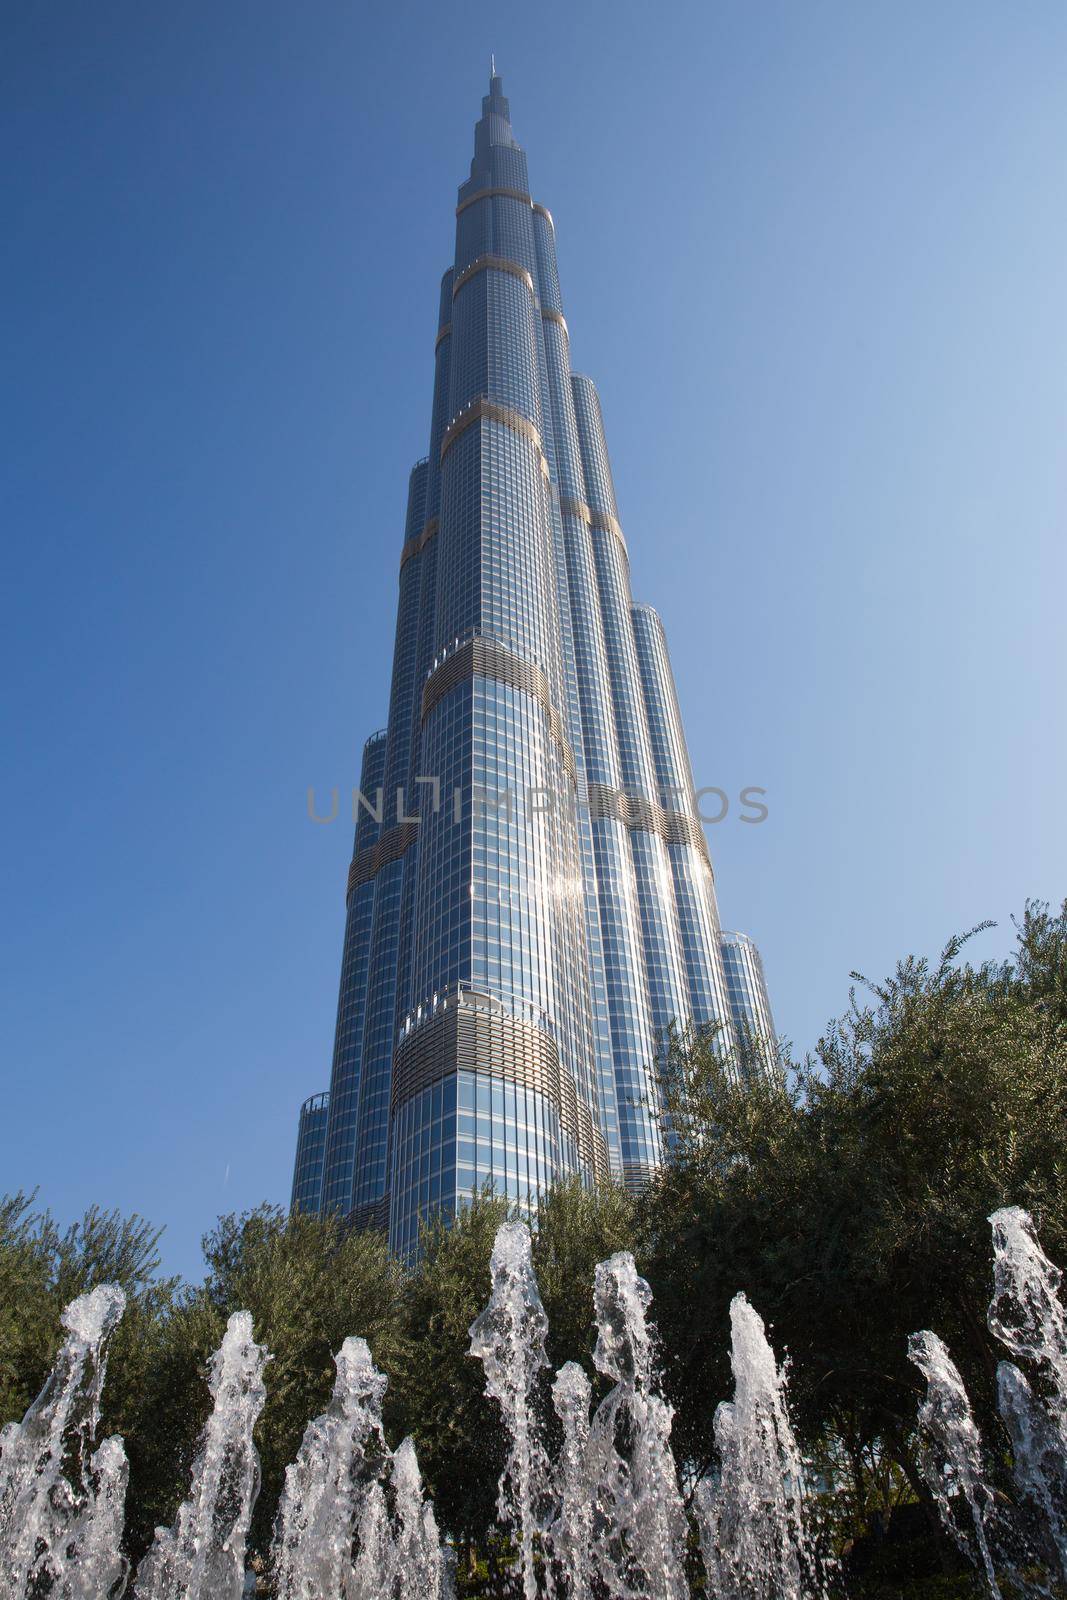 DUBAI, UNITED ARAB EMIRATES – JANUARY 20: Tower Burj Khalifa vanishing in blue sky on January 20, 2014 in Dubai. It is the tallest structure in world since 2010, 829.8 meters and one of the most visited tourist attractions in the world. by Mariakray